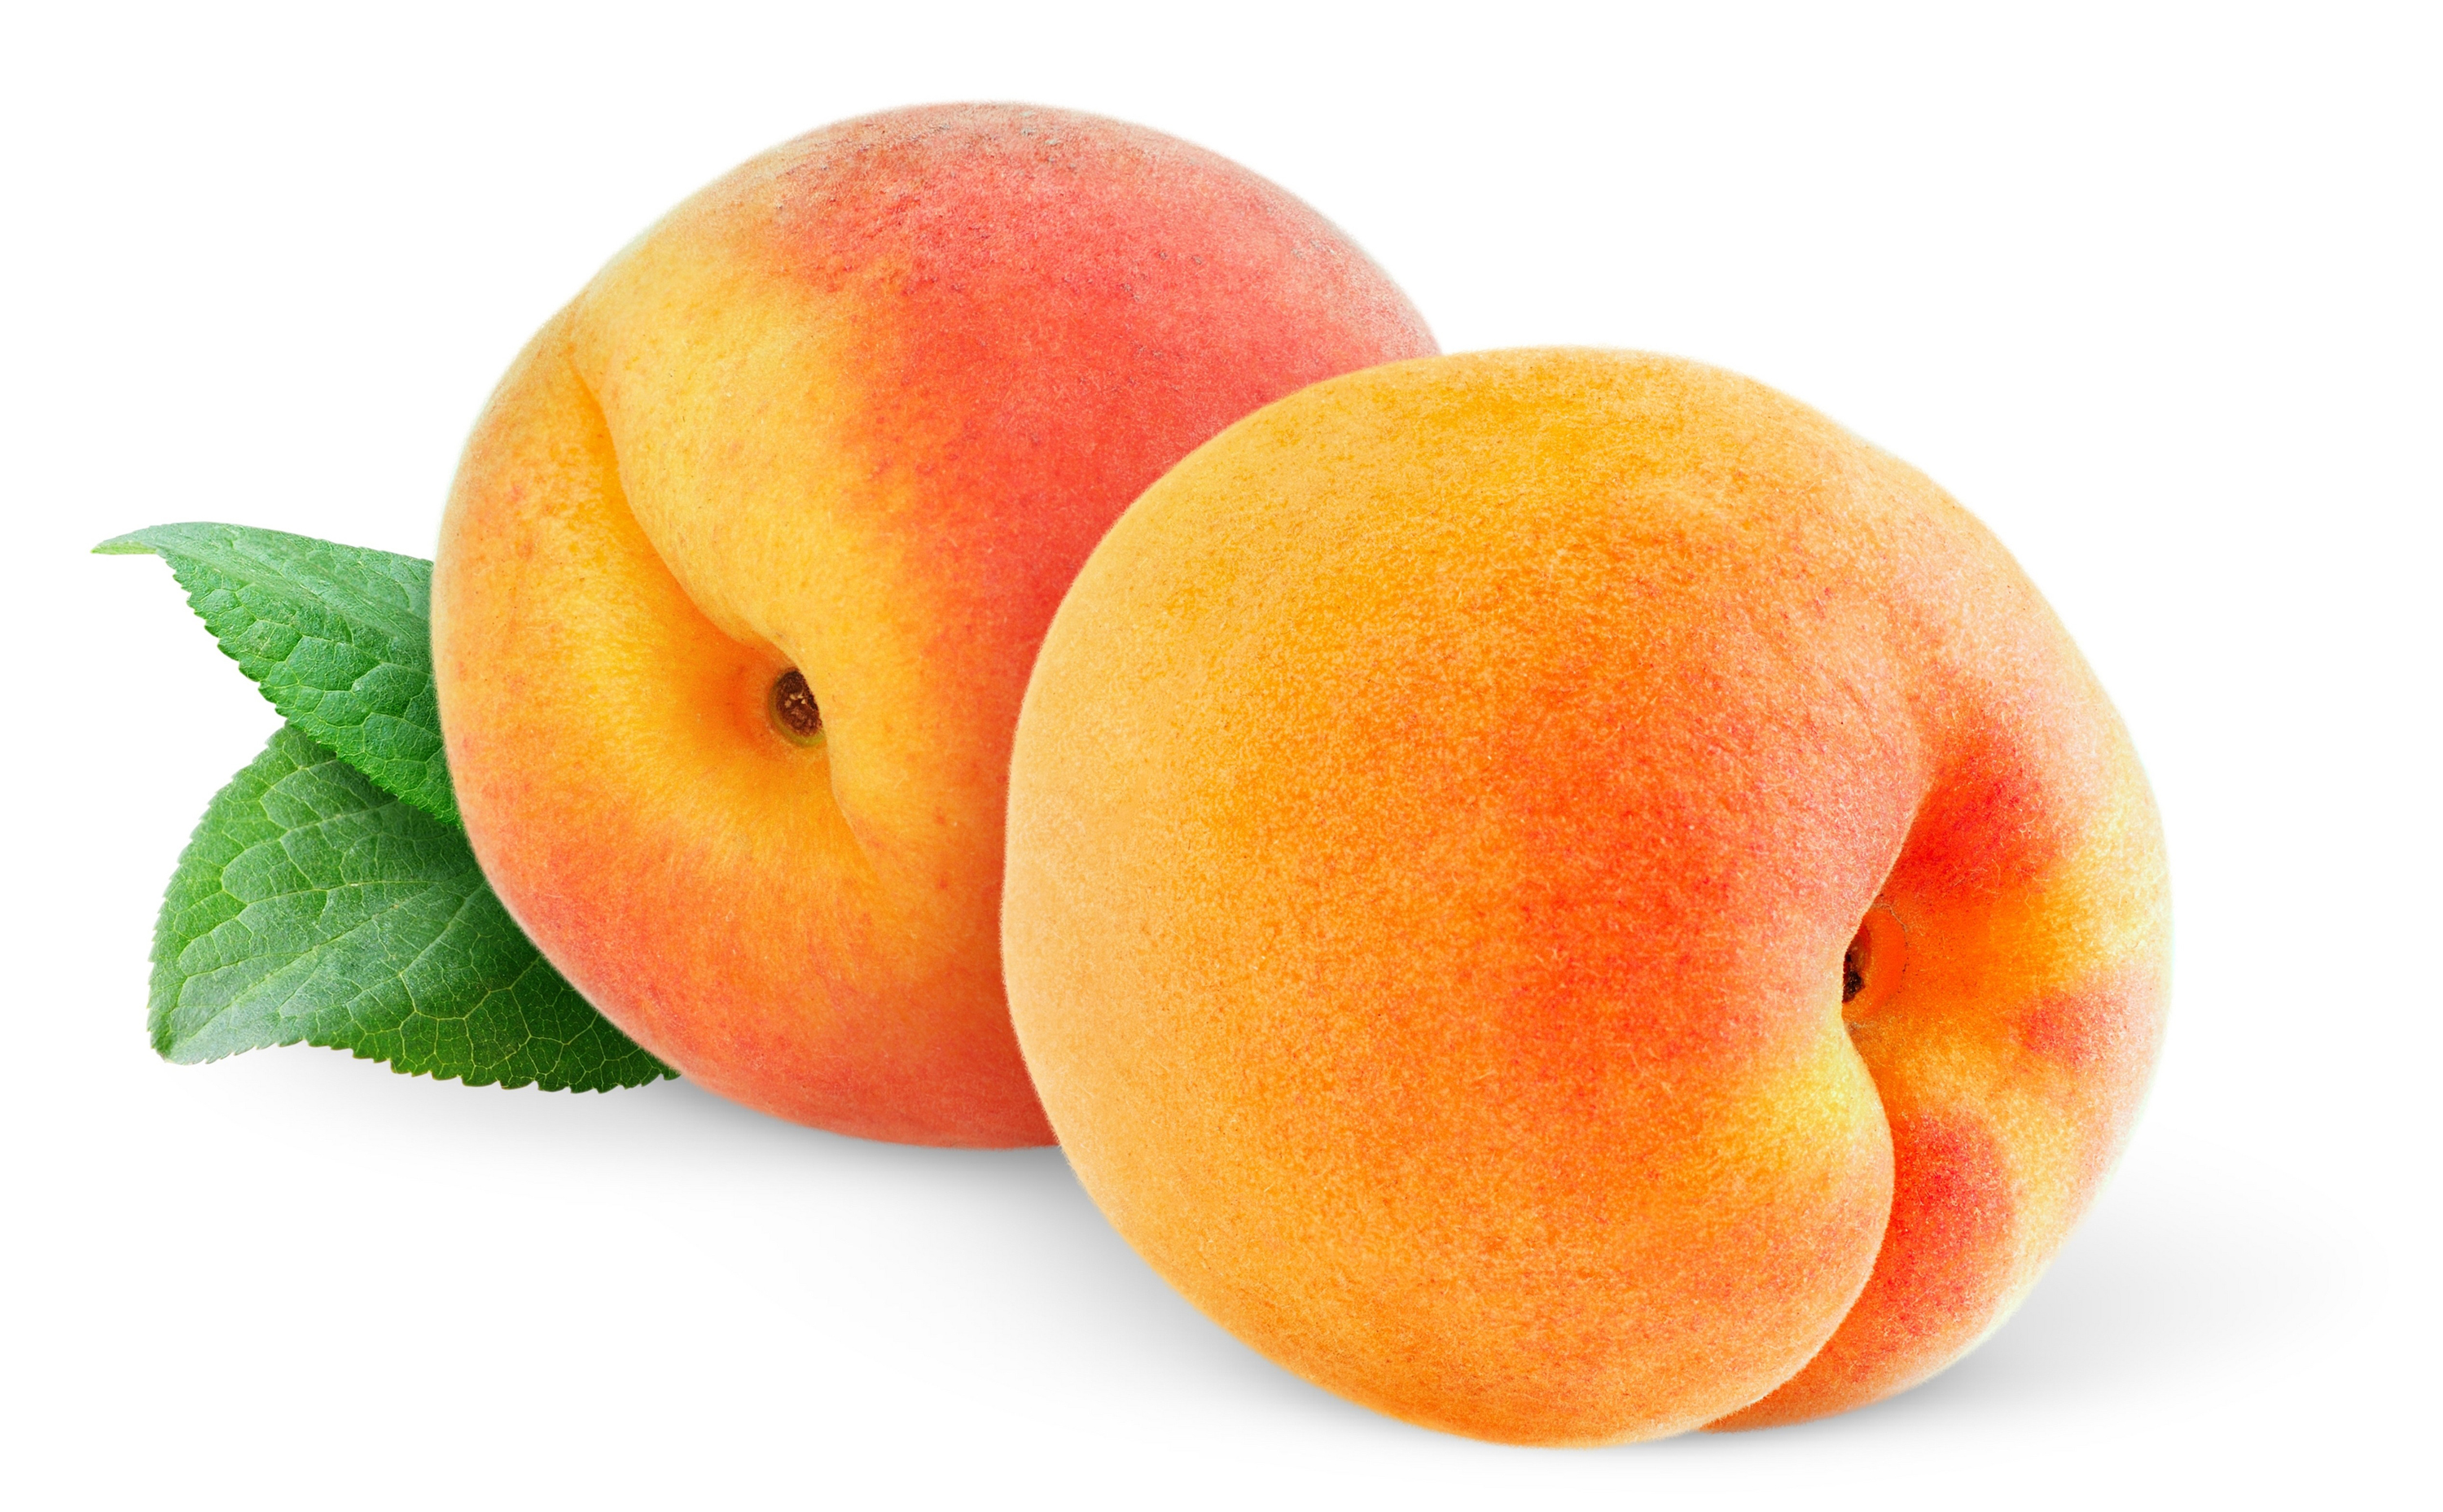 Peach Month As a huge fan of this fruit and a resident of the Peach